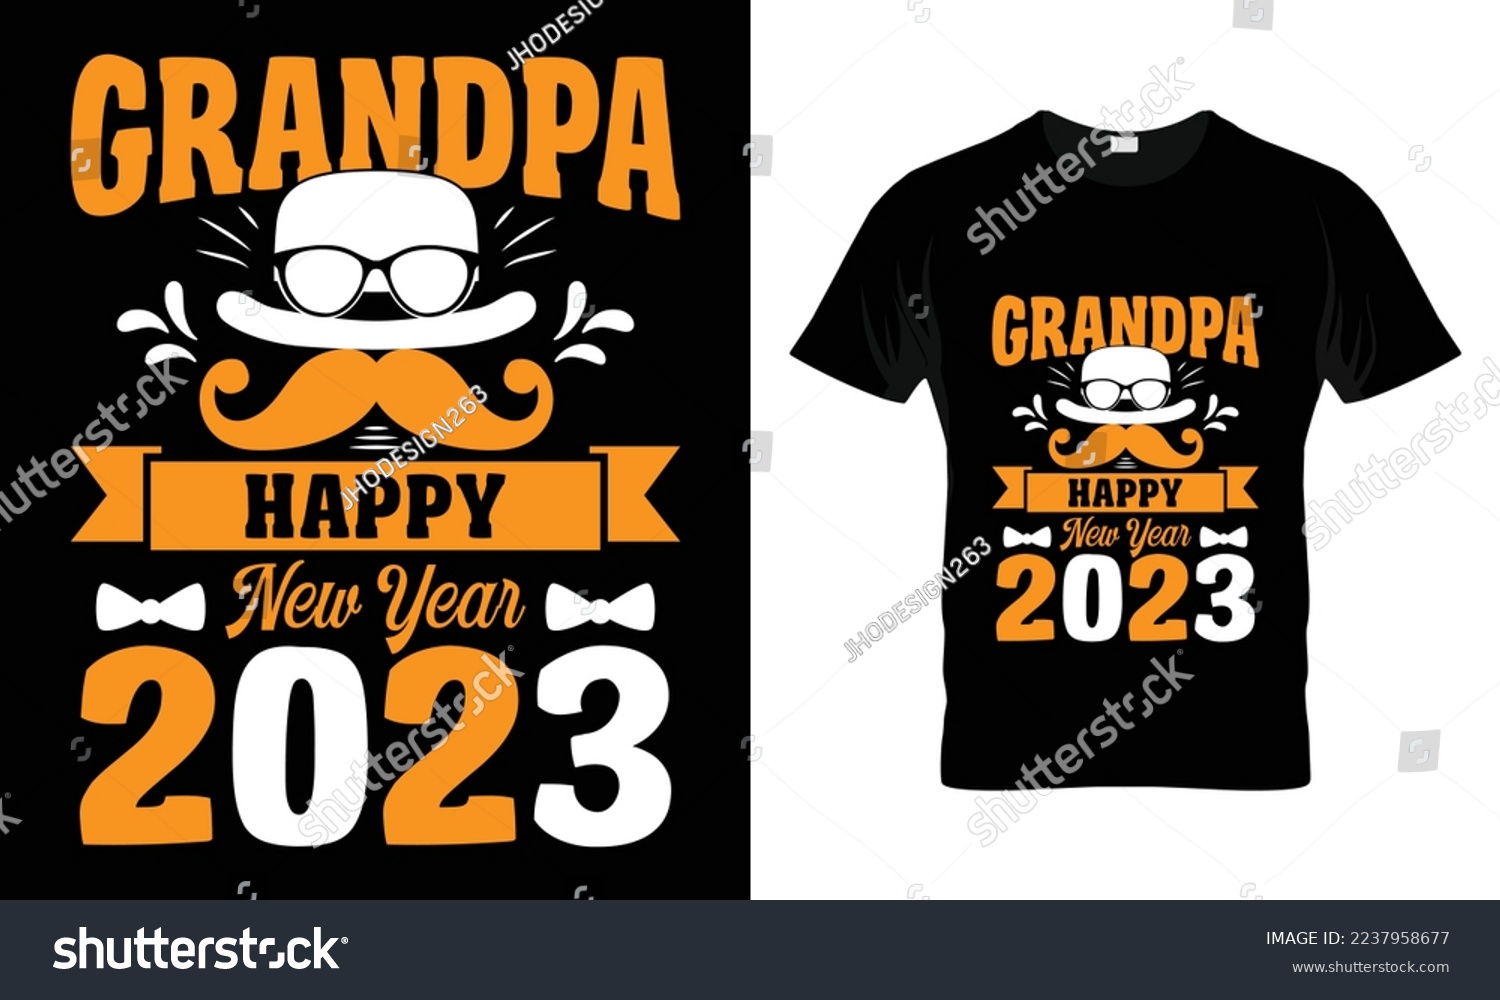 SVG of Grandpa happy new year 2023 design template vector and typography.
Ready for t-shirt, mug,gift and other printing,2023 svg design,New Year Stickers quotes t shirt designs
Happy new year svg. svg